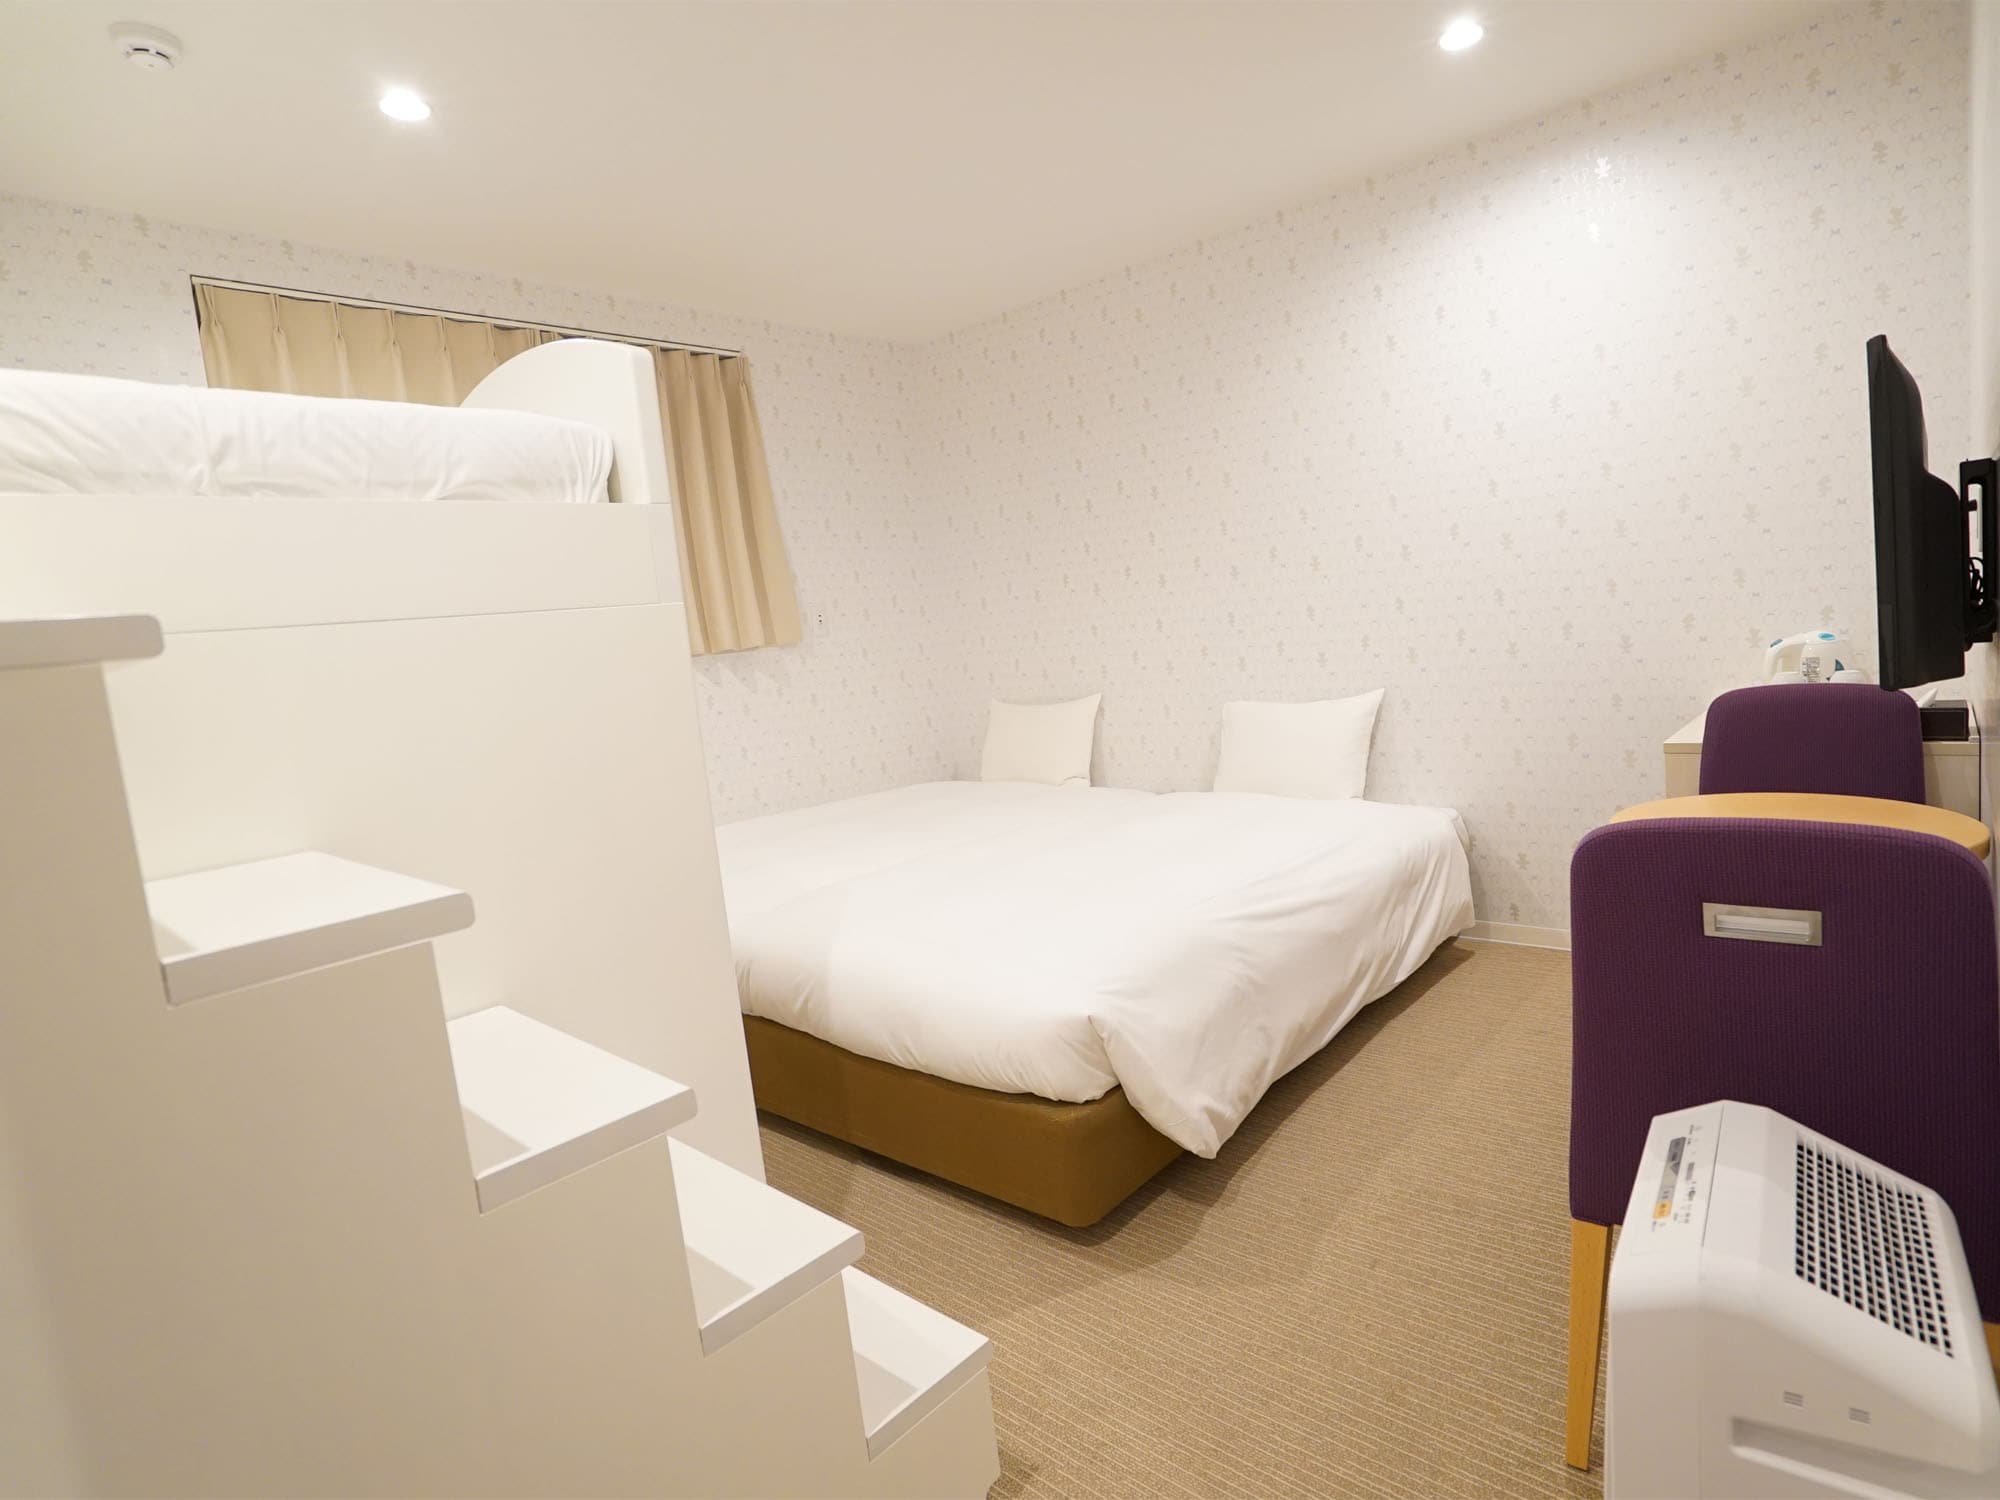 Family room 20.8㎡, reservations can be made for up to 4 adults, using bunk beds